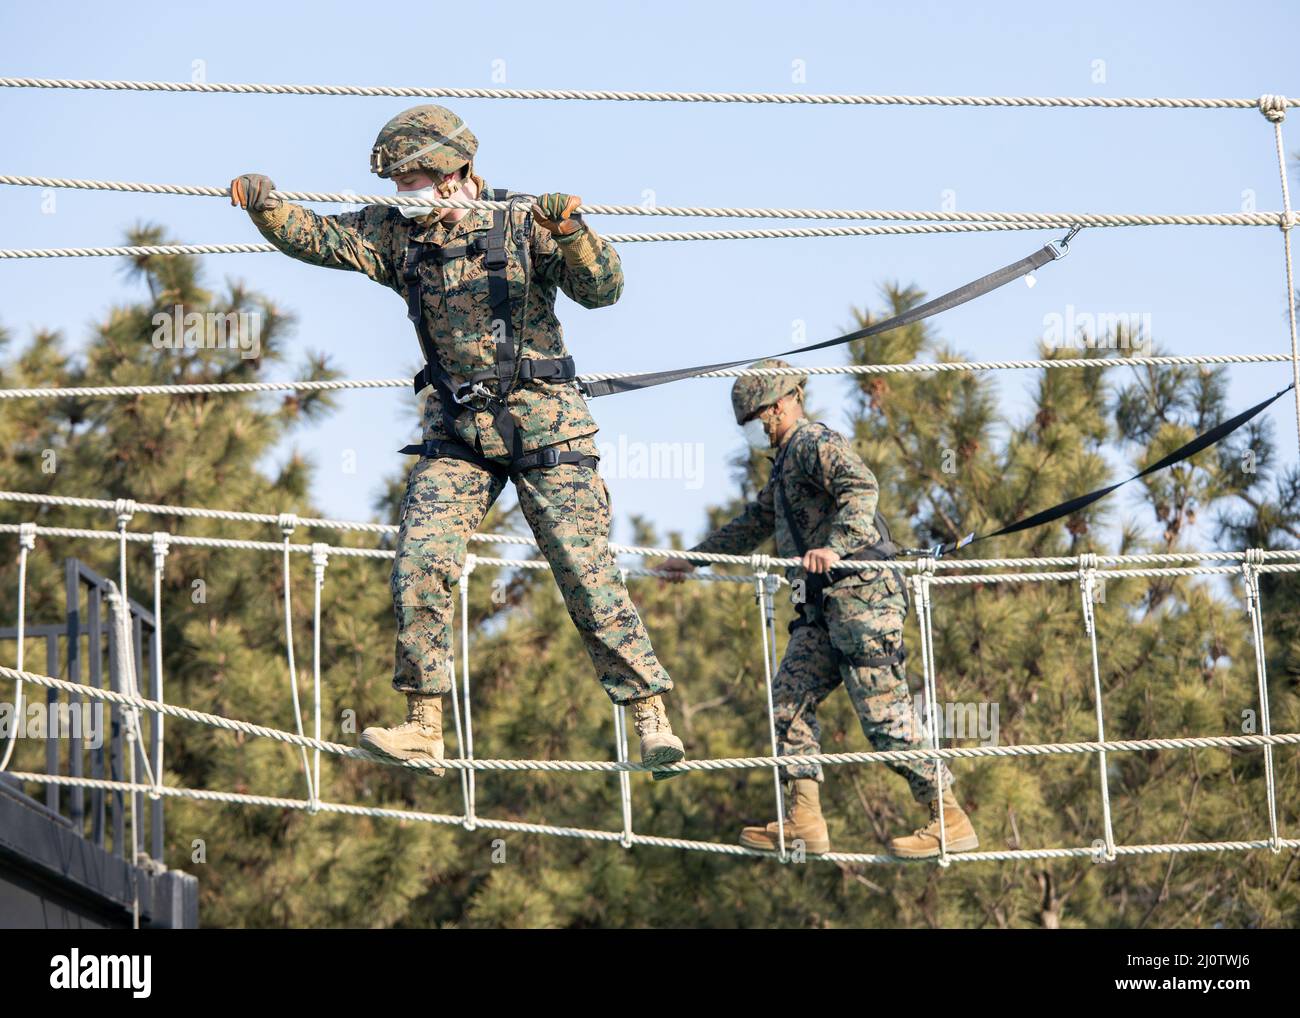 U.S. Marine Corps Lance Cpl. Gunnar Cain, an engineer equipment operator with 3D Sustainment Group (Experimental), 3D Marine Logistics Group, left, and Cpl. Dominic Bishop, a small arms repair technician with U.S. Marine Corps Forces Korea, cross rope bridges during a ropes course with Republic of Korea Marine Corps Ranger School in Pohang, South Korea, Jan. 27, 2022. The course increased the Marines’ readiness with rappelling and rope work while improving interoperability with our partners and allies. (U.S. Marine Corps photo by Sgt. Ash McLaughlin) Stock Photo